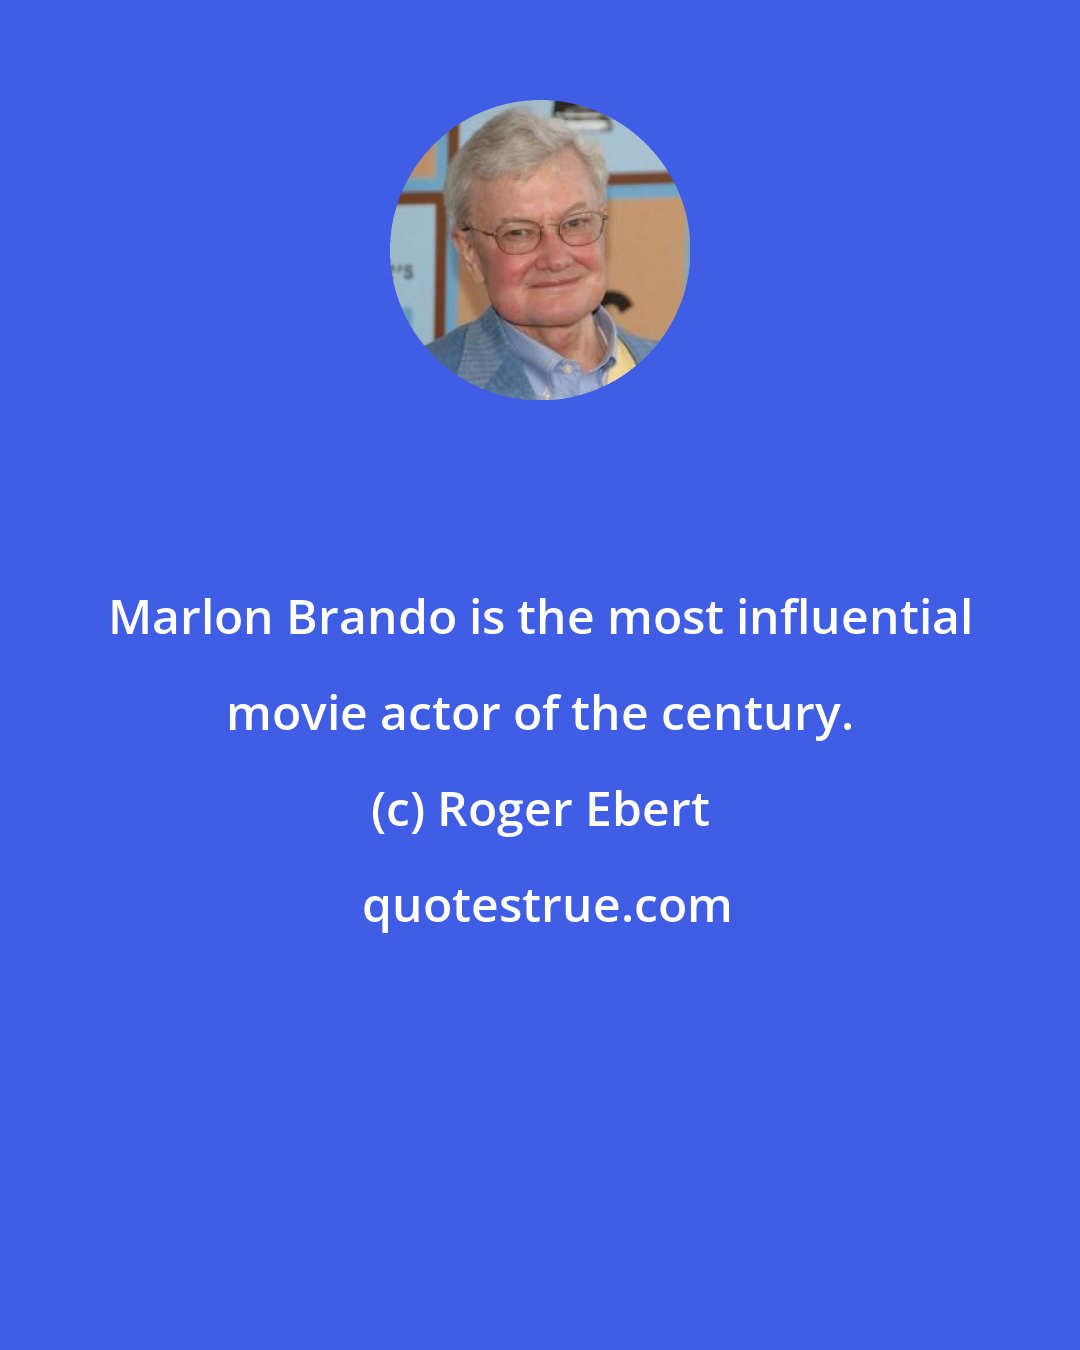 Roger Ebert: Marlon Brando is the most influential movie actor of the century.